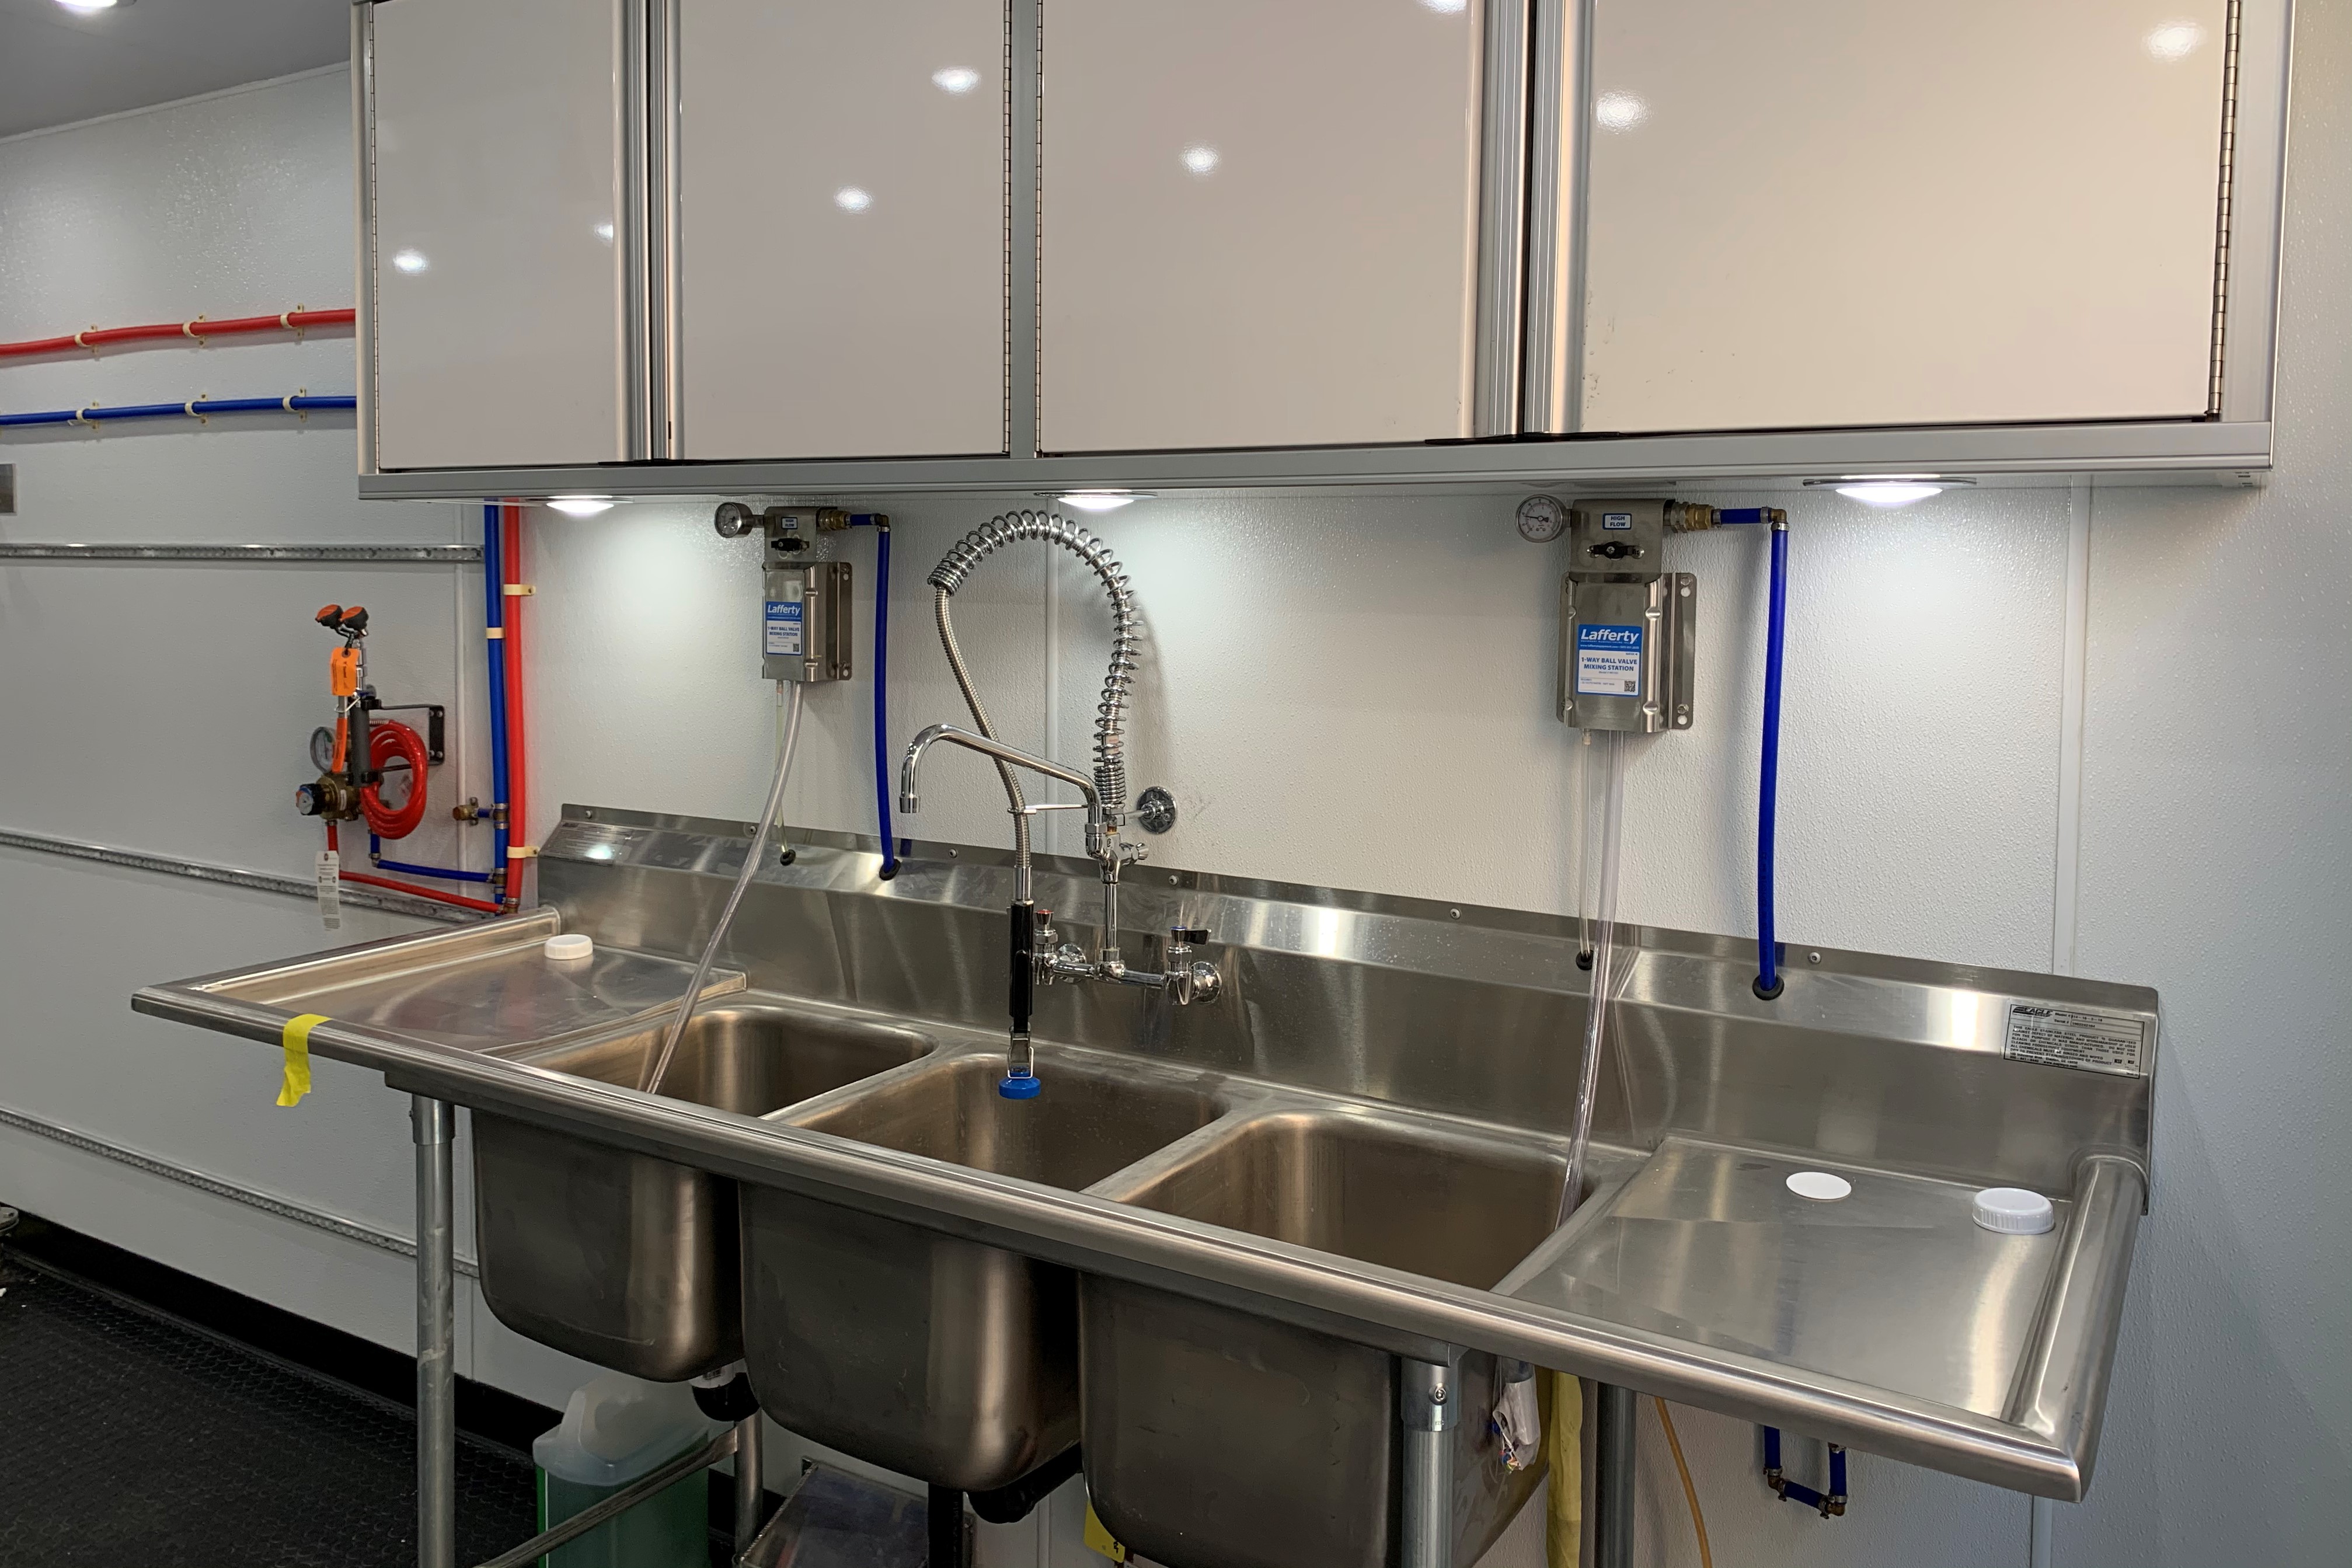 Mobile-food-processing-lab-three-compartment-sink